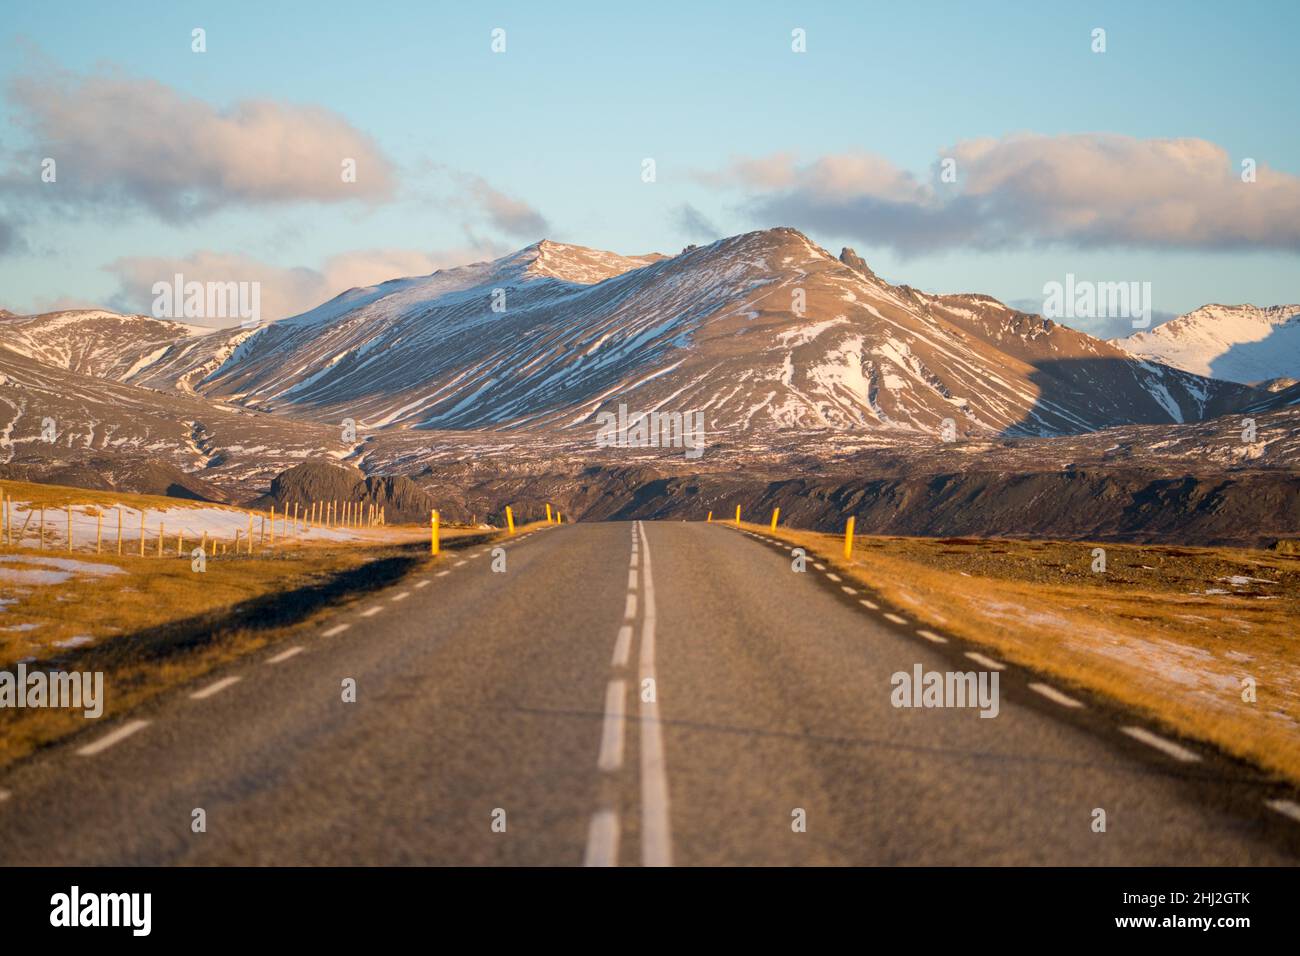 A beautiful landscape of a road in a mountainous area Stock Photo